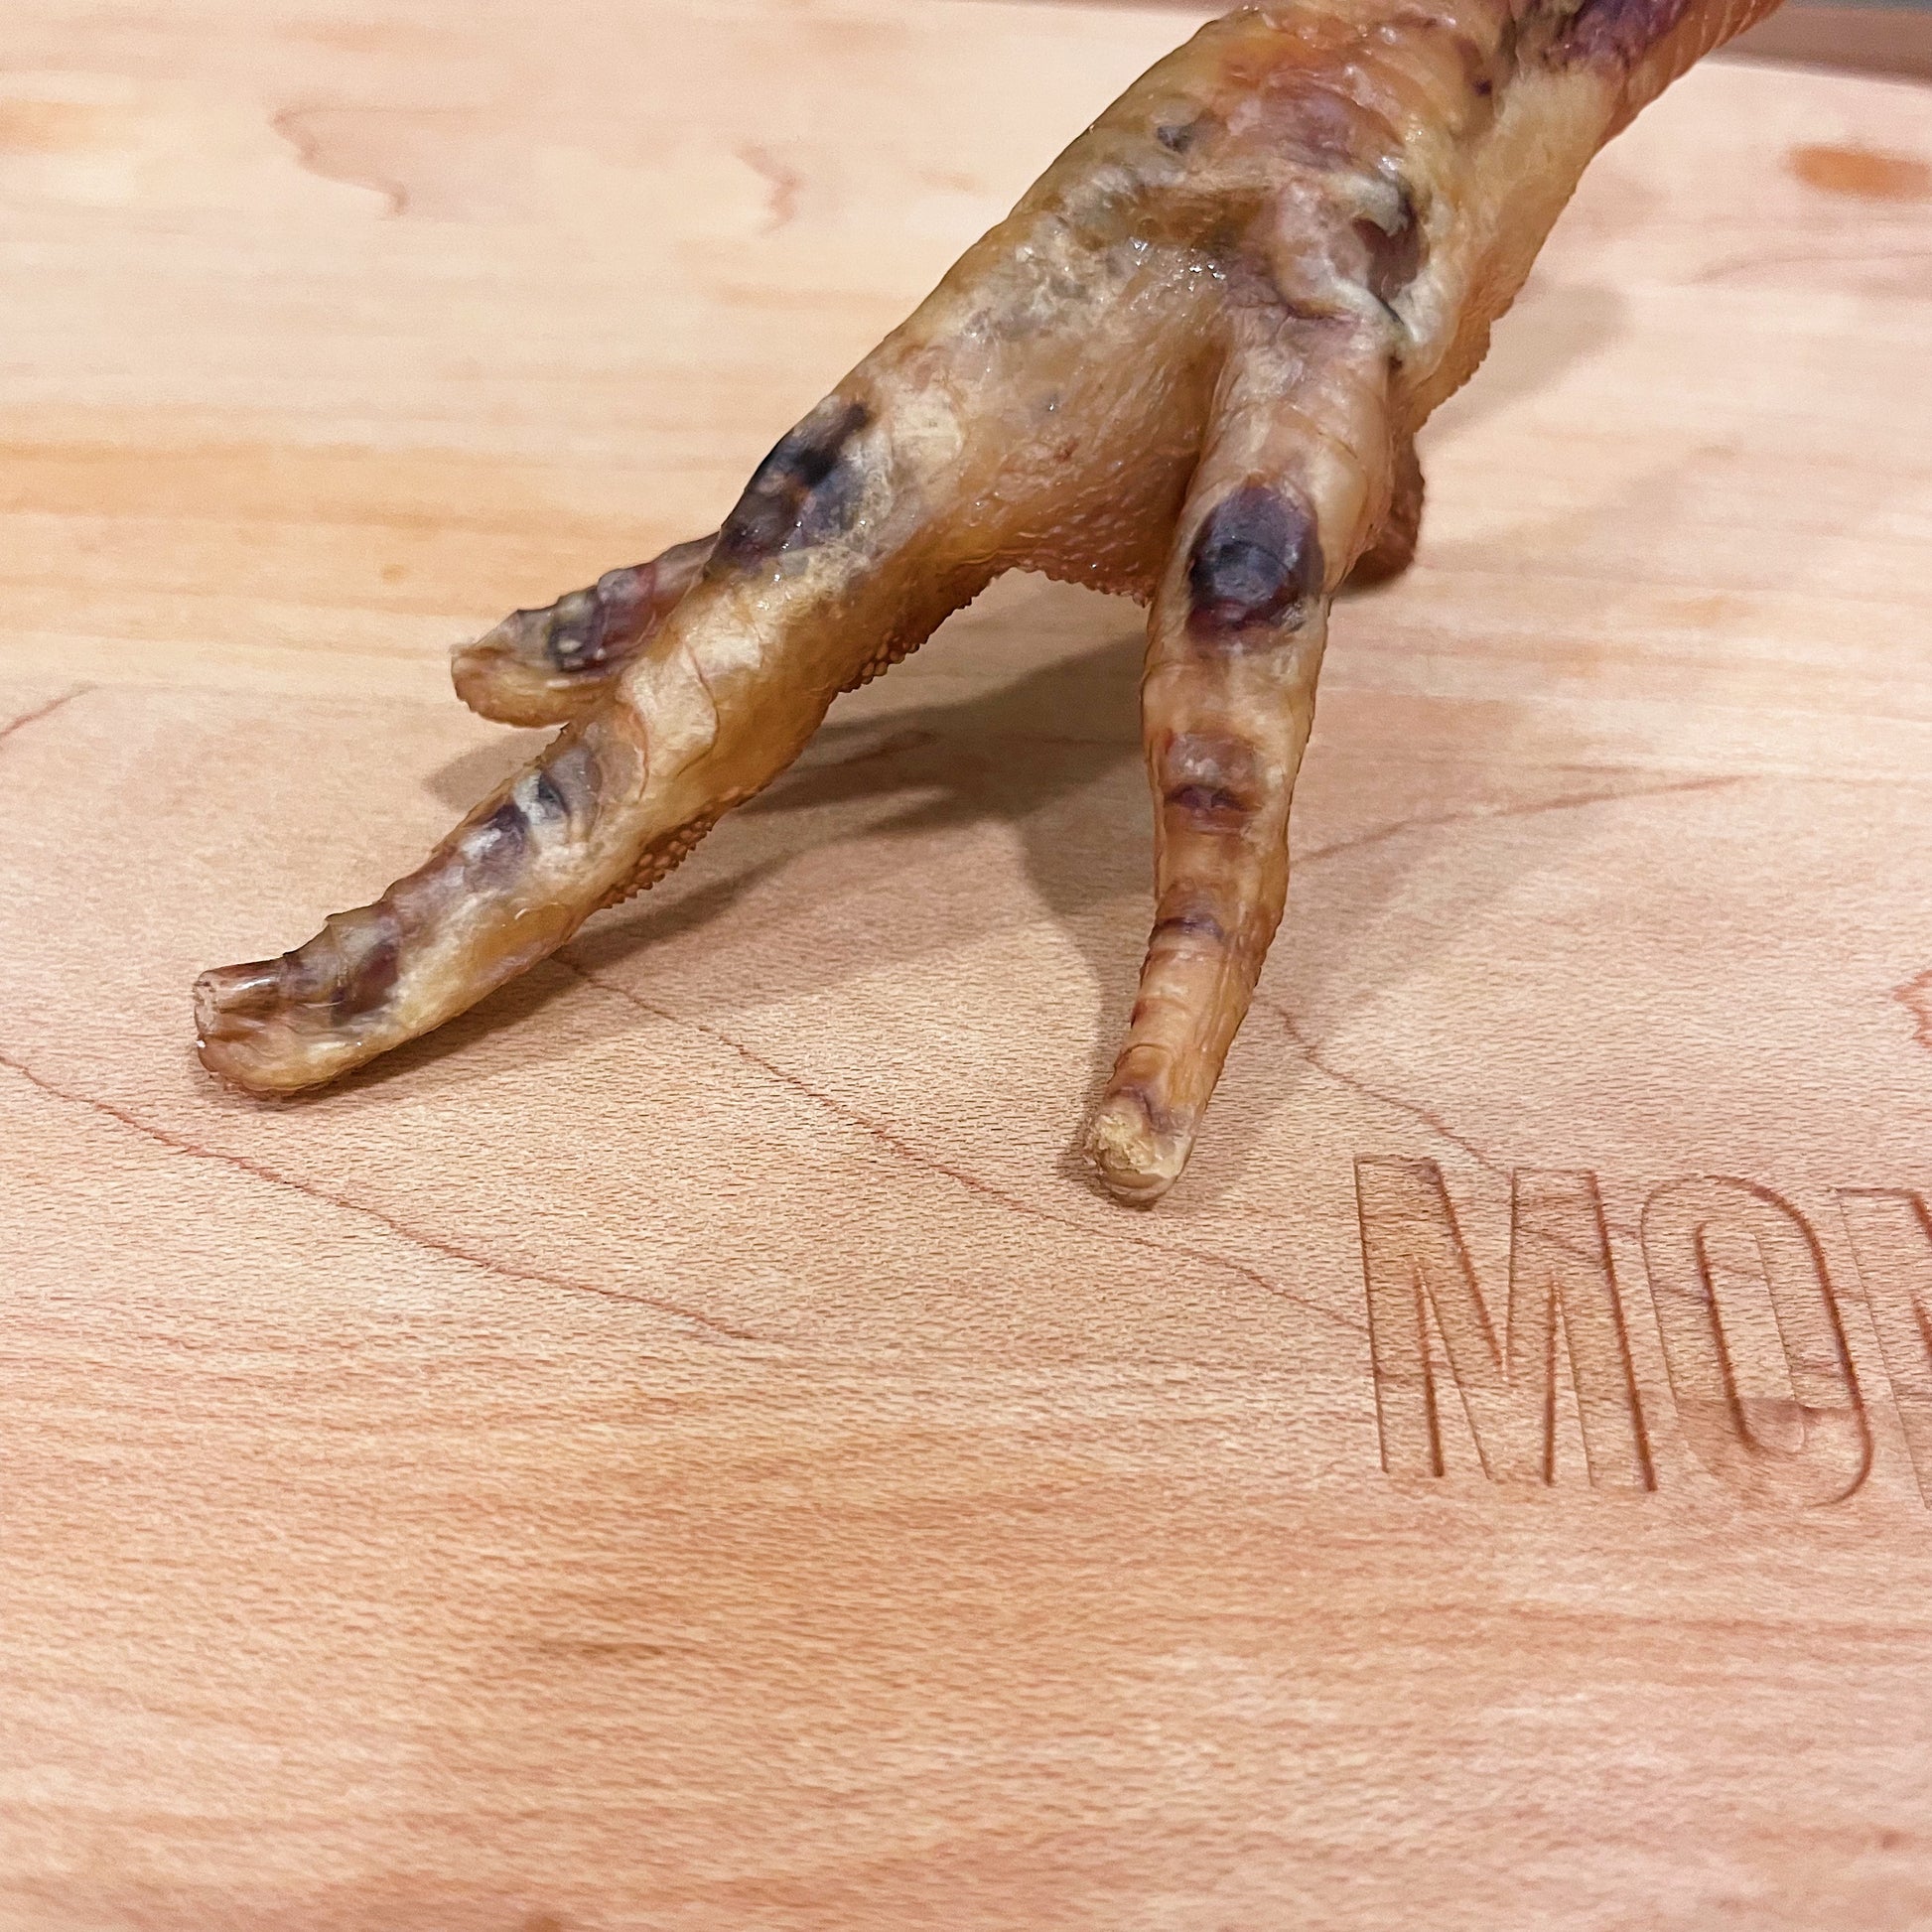 a close up picture of a chicken feet, showing the nails are clipped.